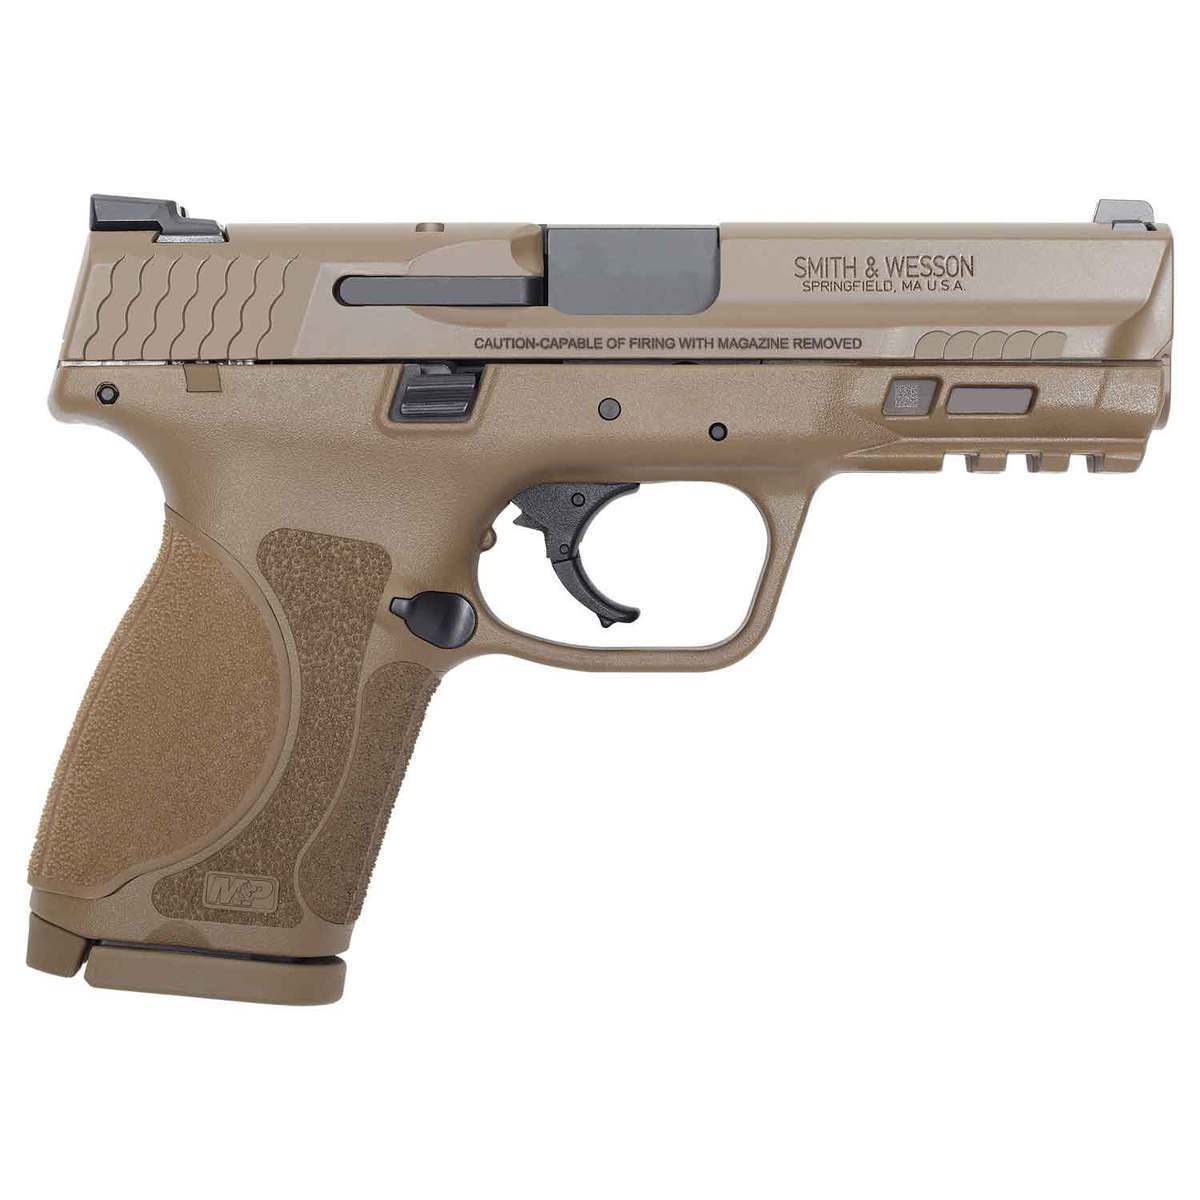 Smith And Wesson Mandp 9 M20 Compact 9mm Luger 4in Fde Pistol 151 Rounds Tan Sportsmans 4253